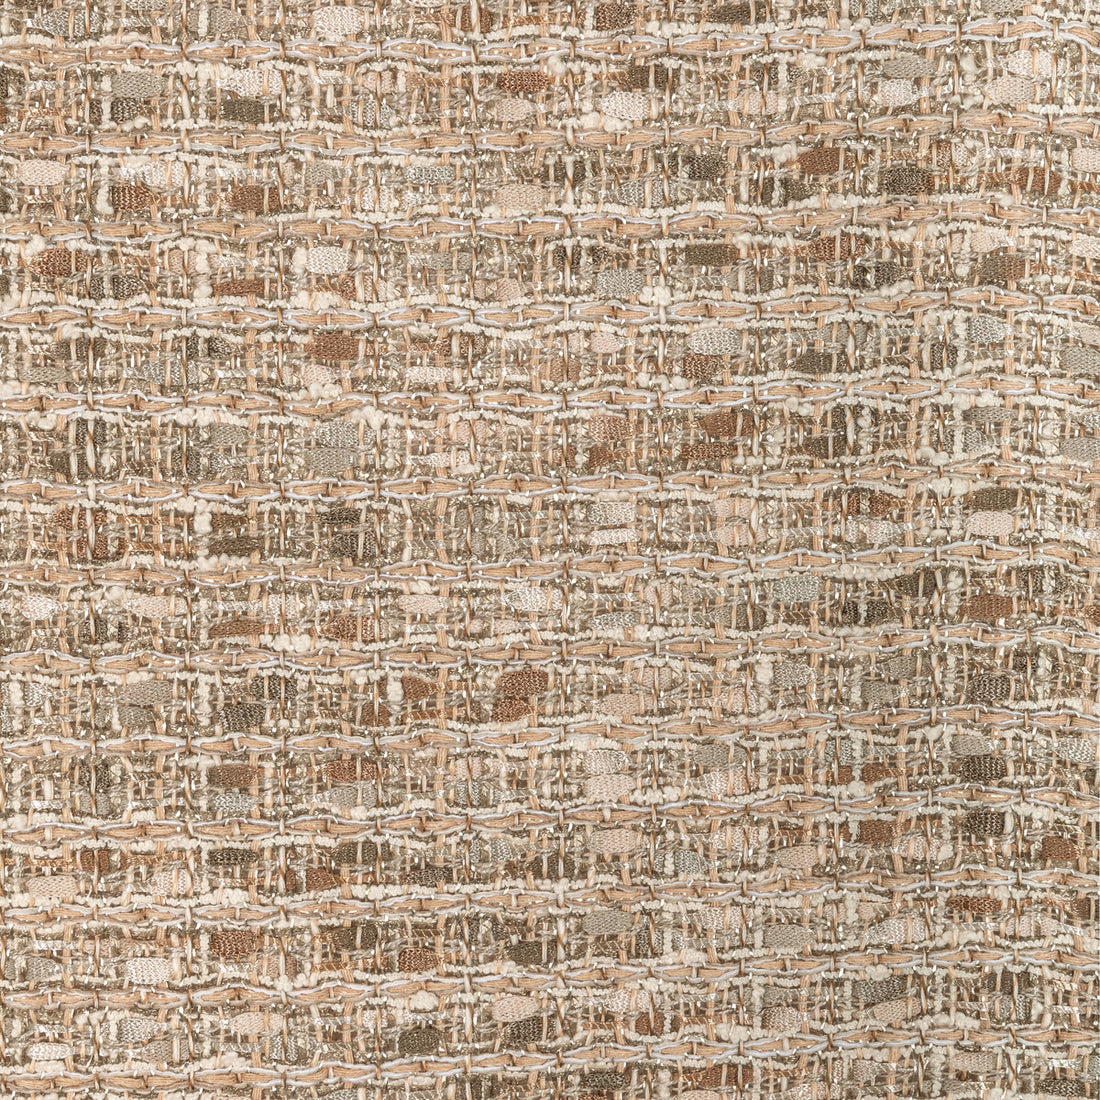 Sheer Luxe fabric in sandstone color - pattern 4886.16.0 - by Kravet Couture in the Modern Luxe III collection